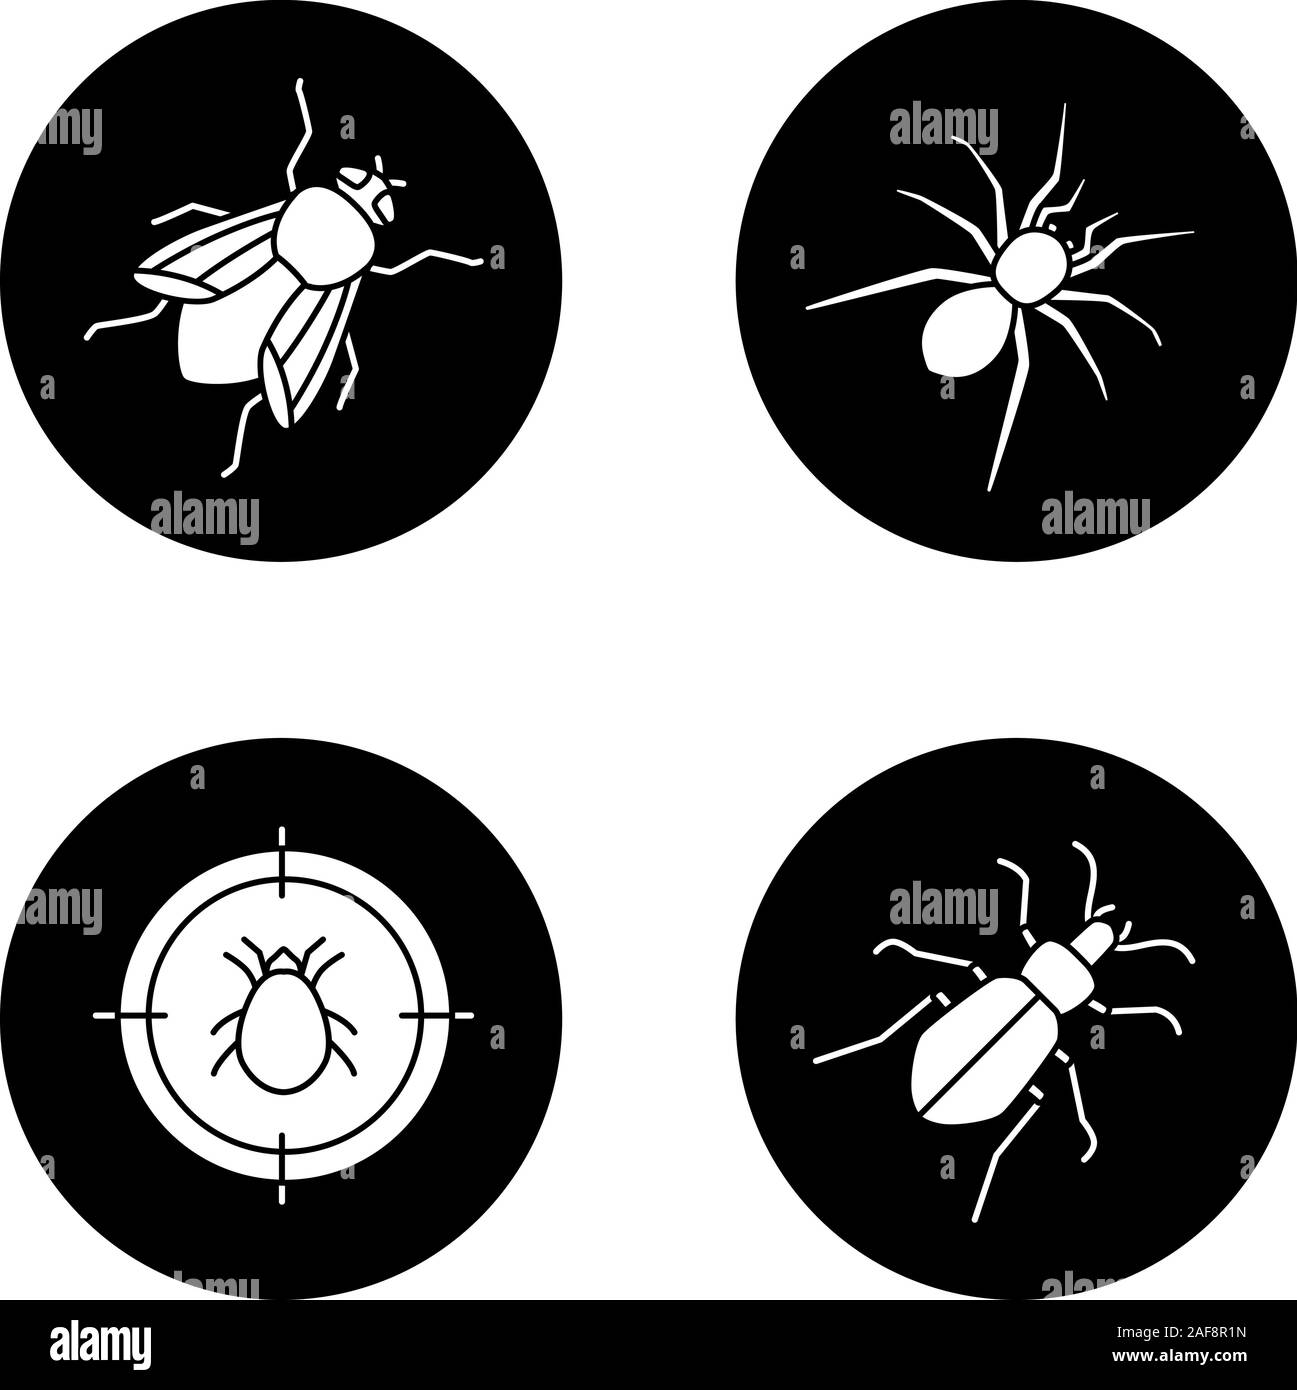 Pest control glyph icons set. Mite target, ground beetle, spider, housefly. Vector white silhouettes illustrations in black circles Stock Vector